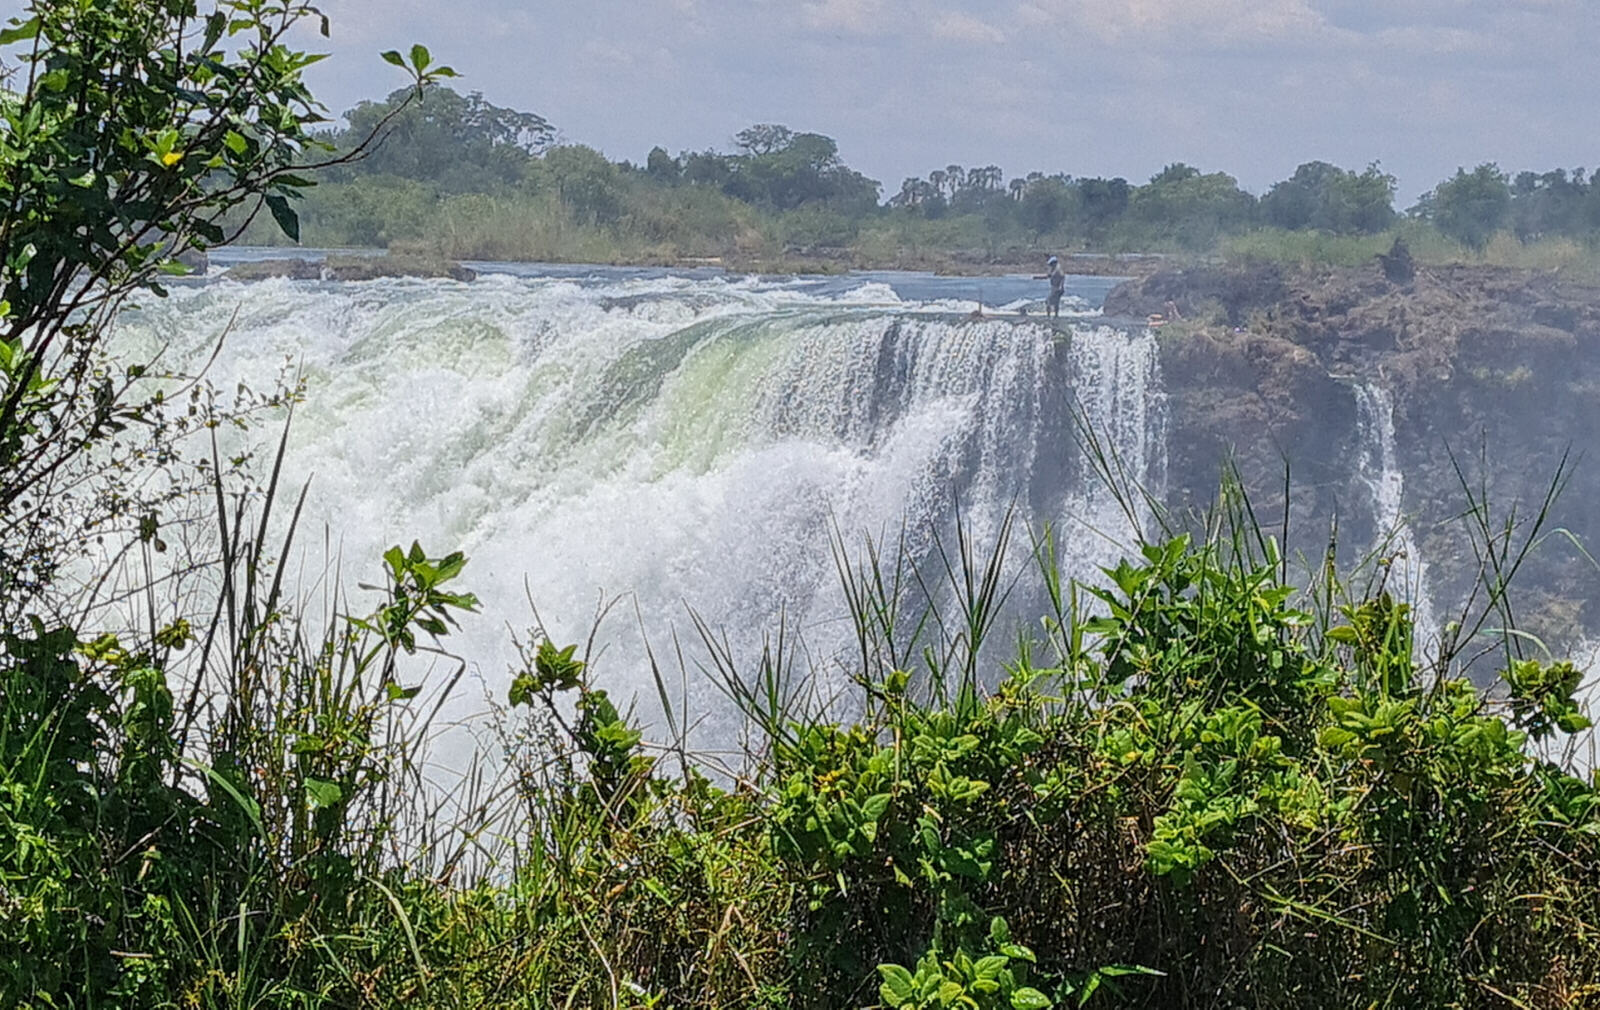 The Devil's Pool, Victoria Falls, from the Zimbabwe side